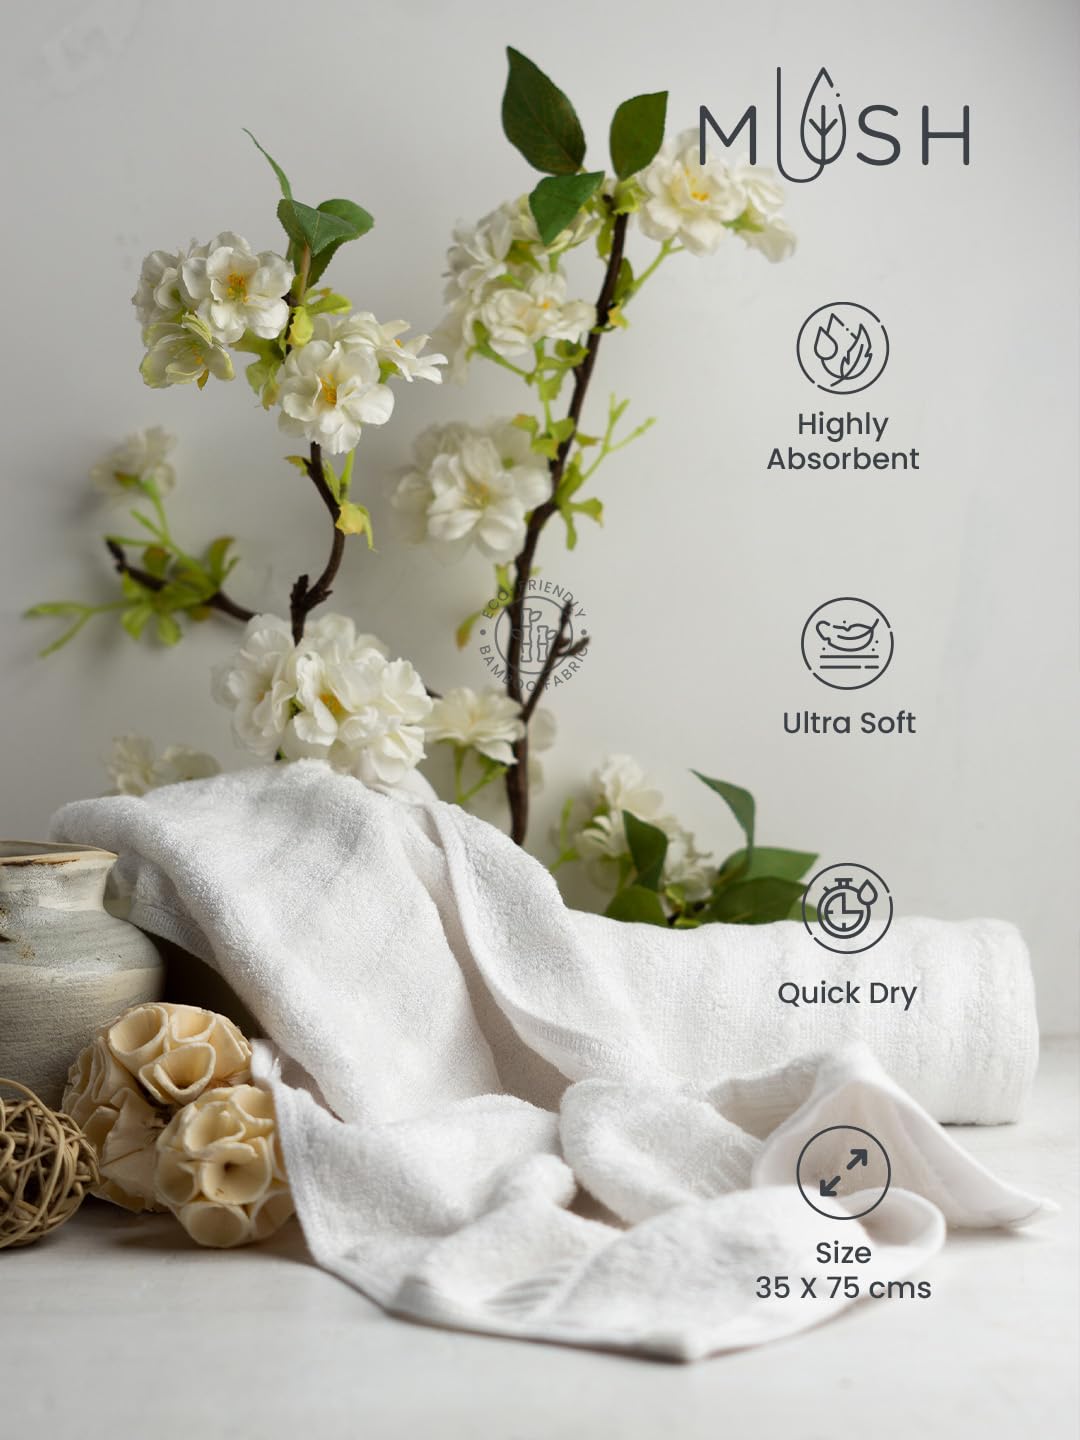 Mush 550 GSM Hand Towel Set of 2 | 100% Bamboo |Ultra Soft, Absorbent & Quick Dry Towel for Gym, Pool, Travel, Spa and Yoga | 29.5 x 14 Inches (Set of 6 Assorted)